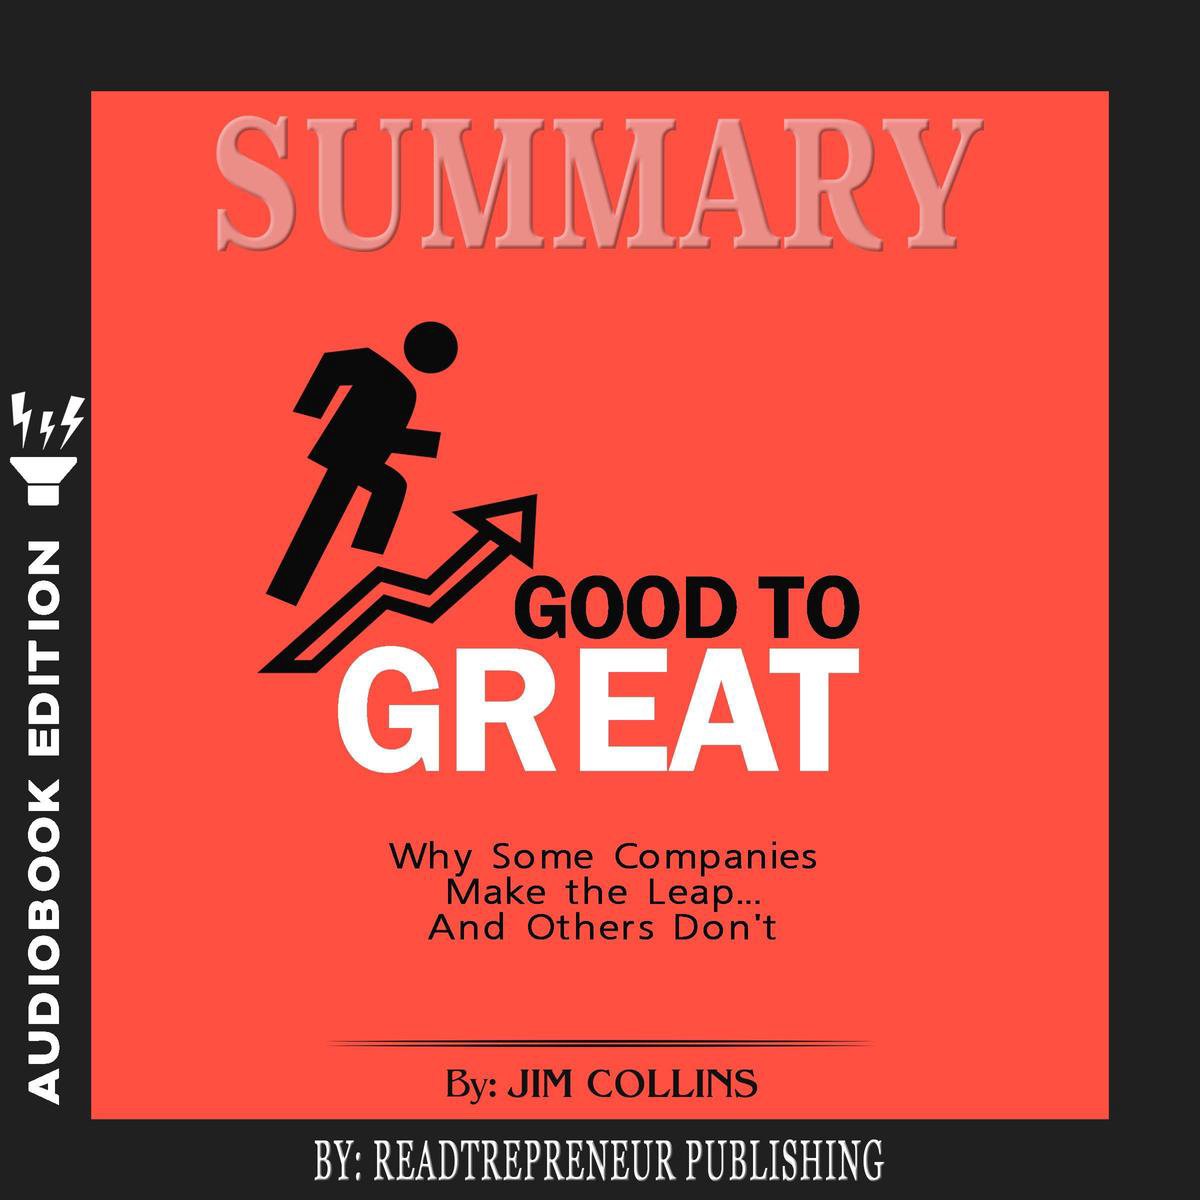 Summary of Good to Great: Why Some Companies Make the Leap...And Others Don't by Jim Collins - Readtrepreneur Publishing